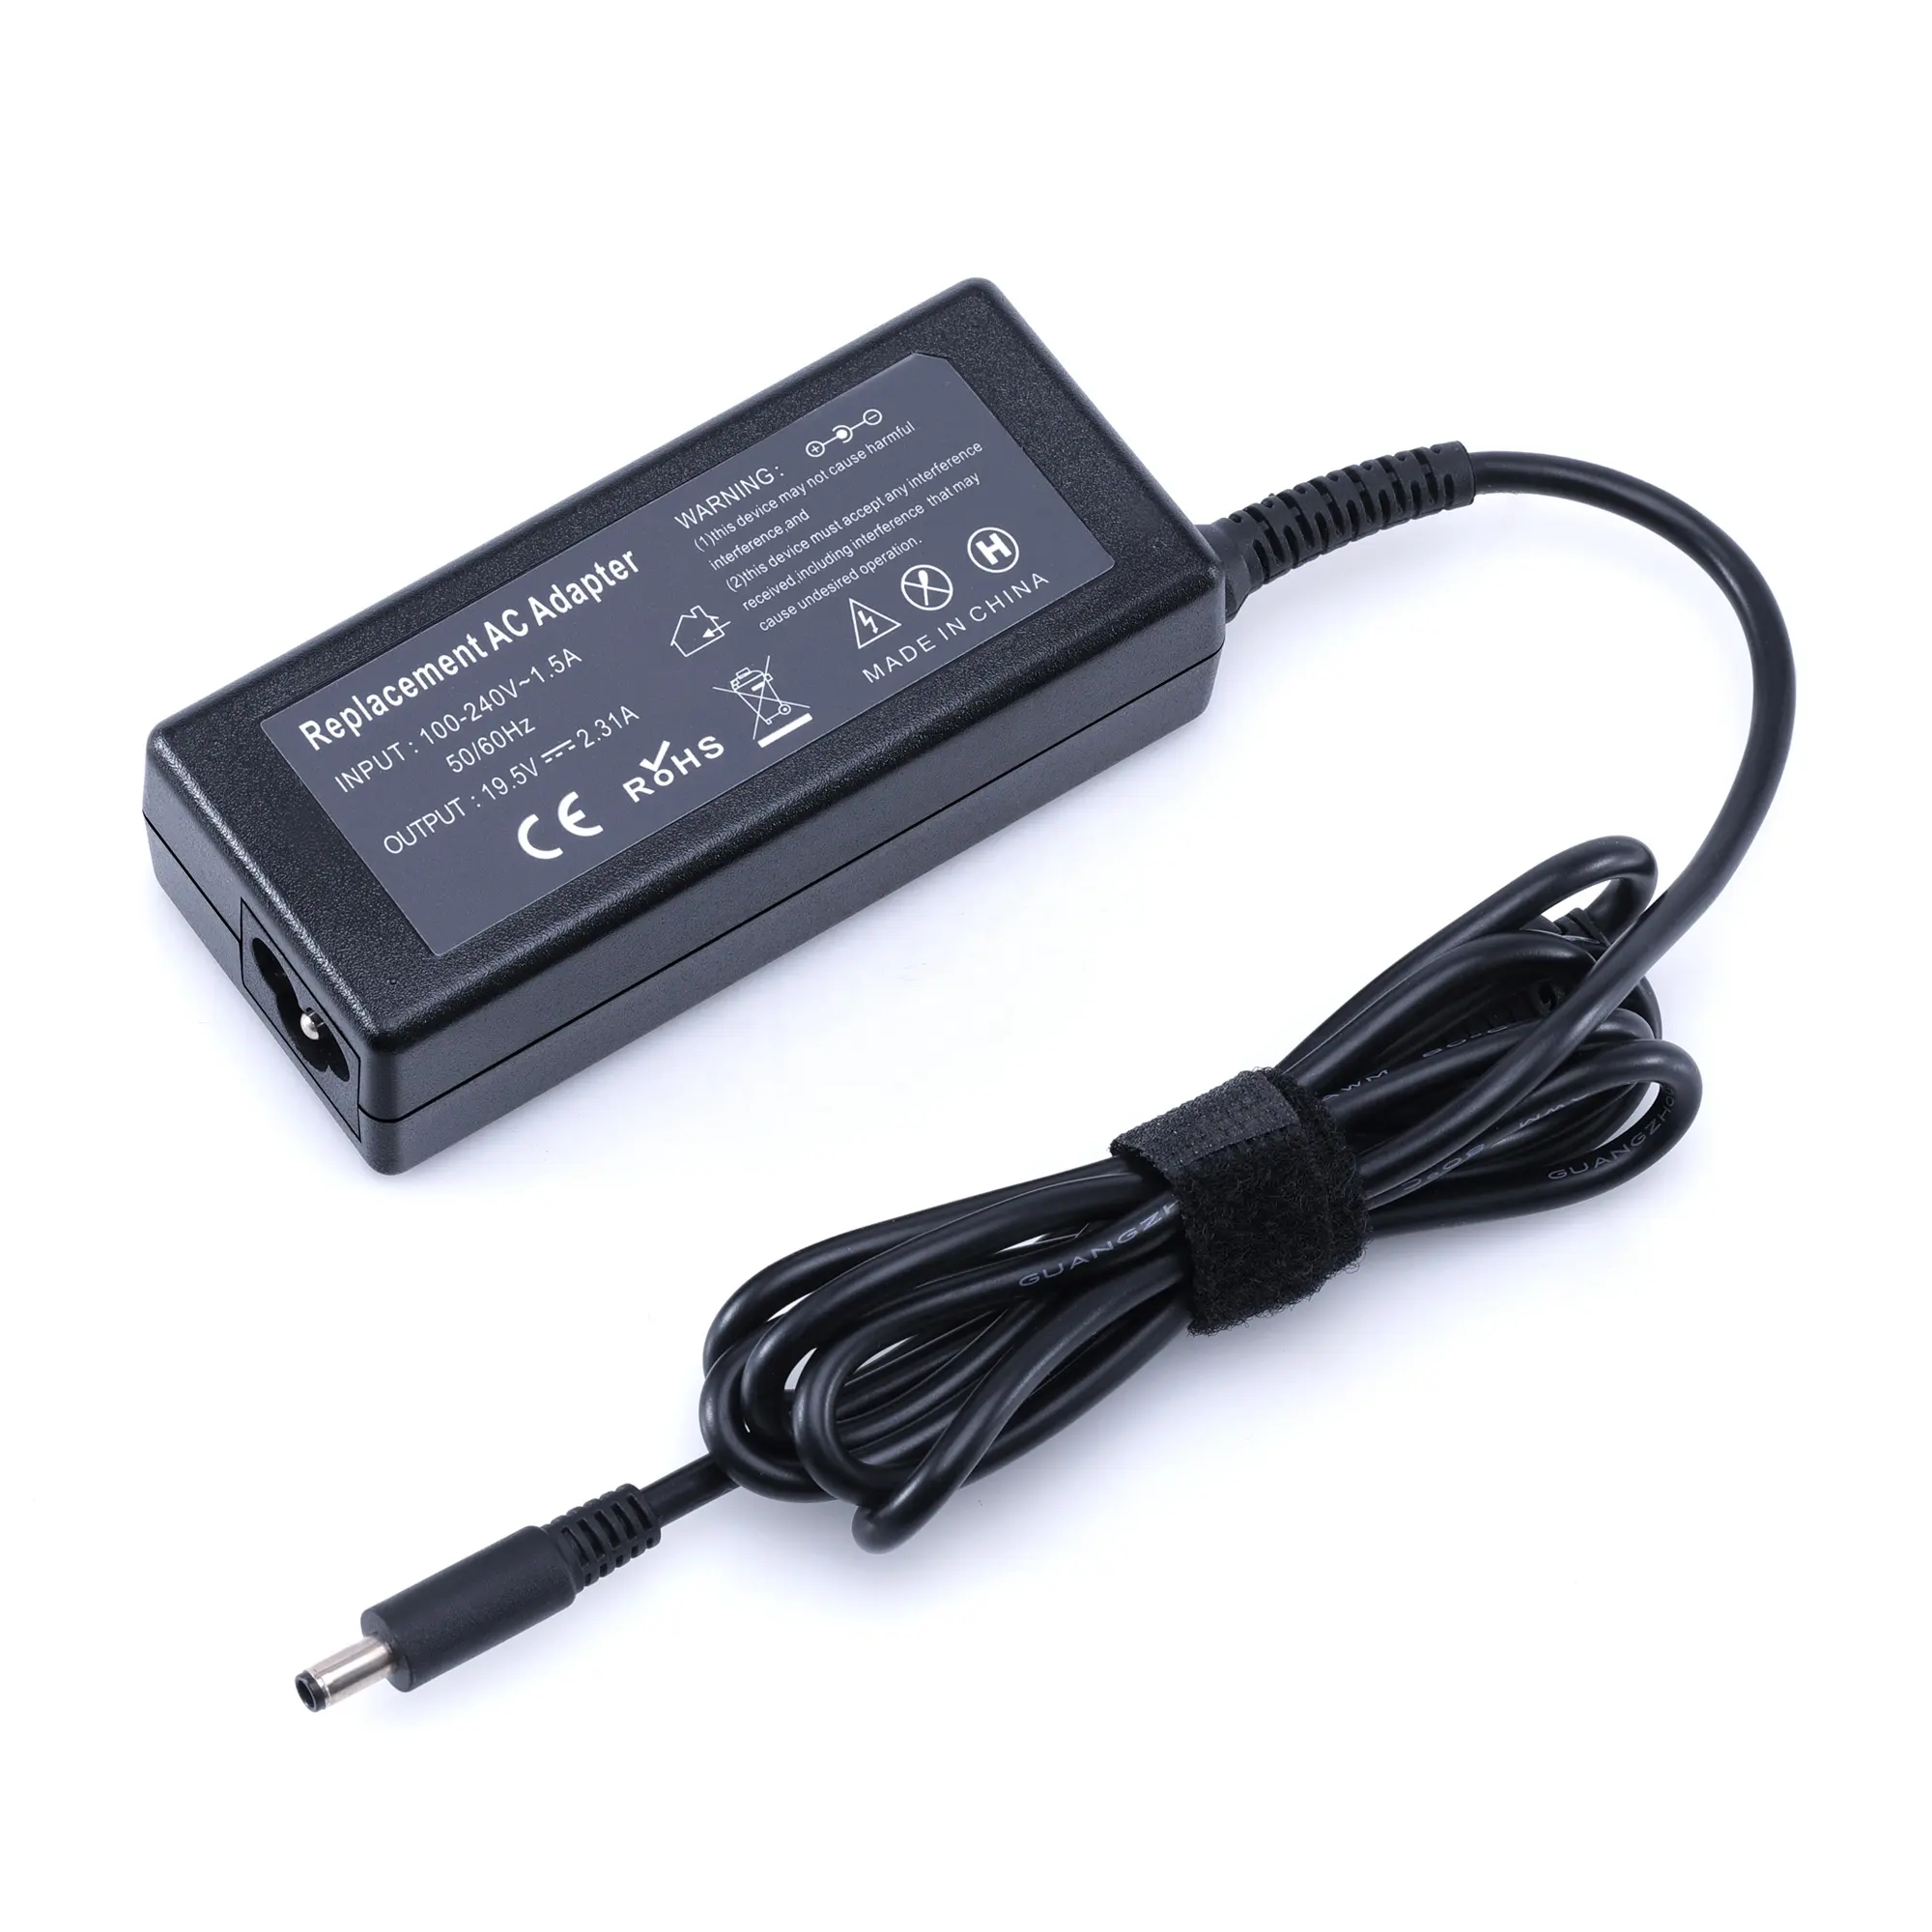 65W 19.5V 3.34A 4.5*3.0mm AC Laptop Charger Power Adapter Supply Fit For Dell Inspiron15 13 17 11Series 5559 5558 5555 3552